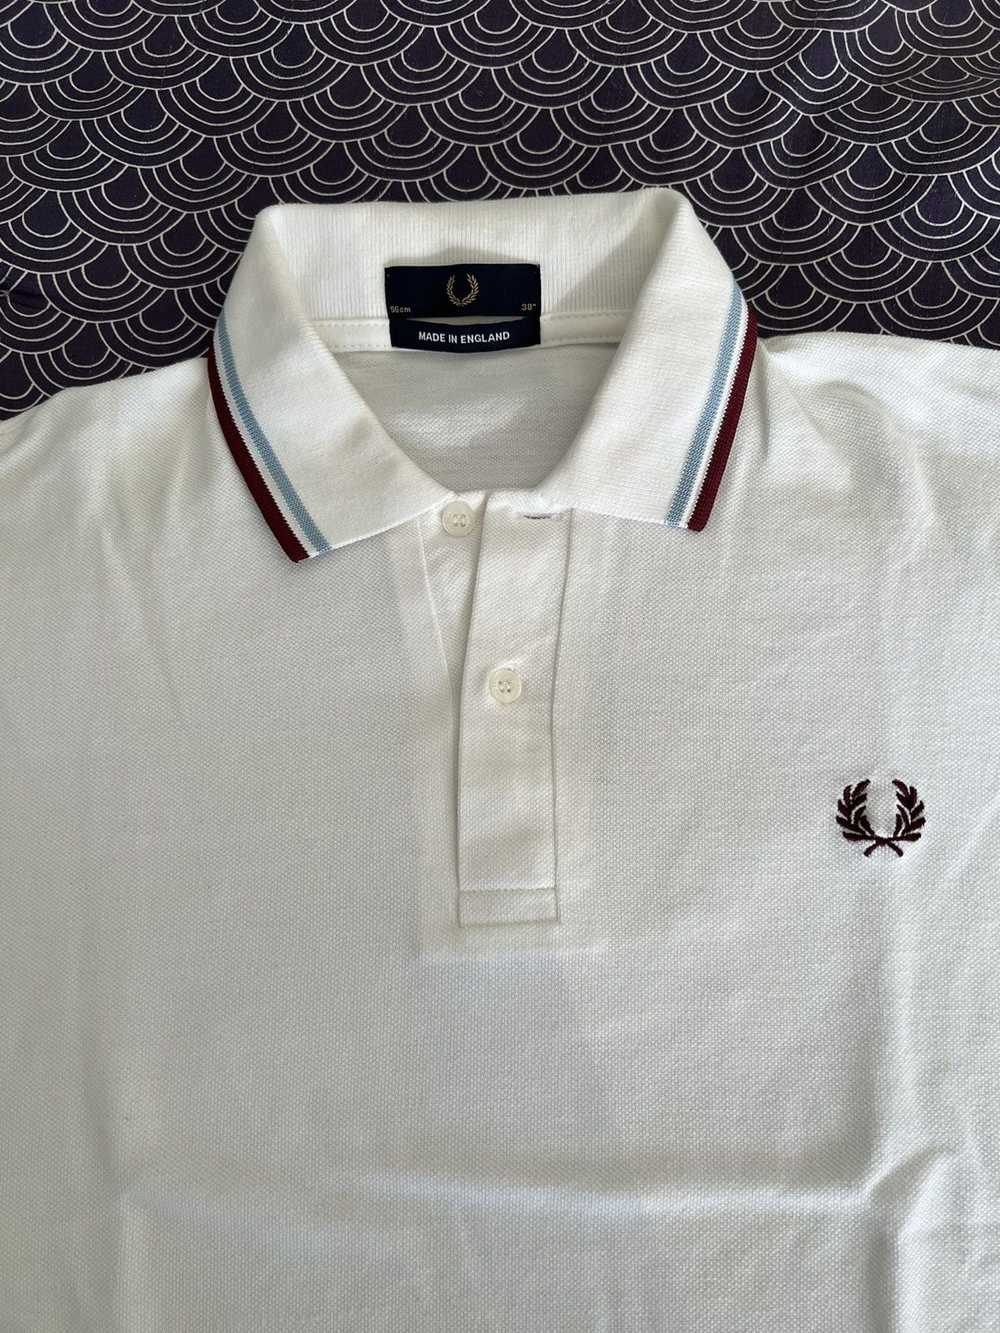 Fred Perry The Fred Perry Shirt (MADE IN ENGLAND) - image 3